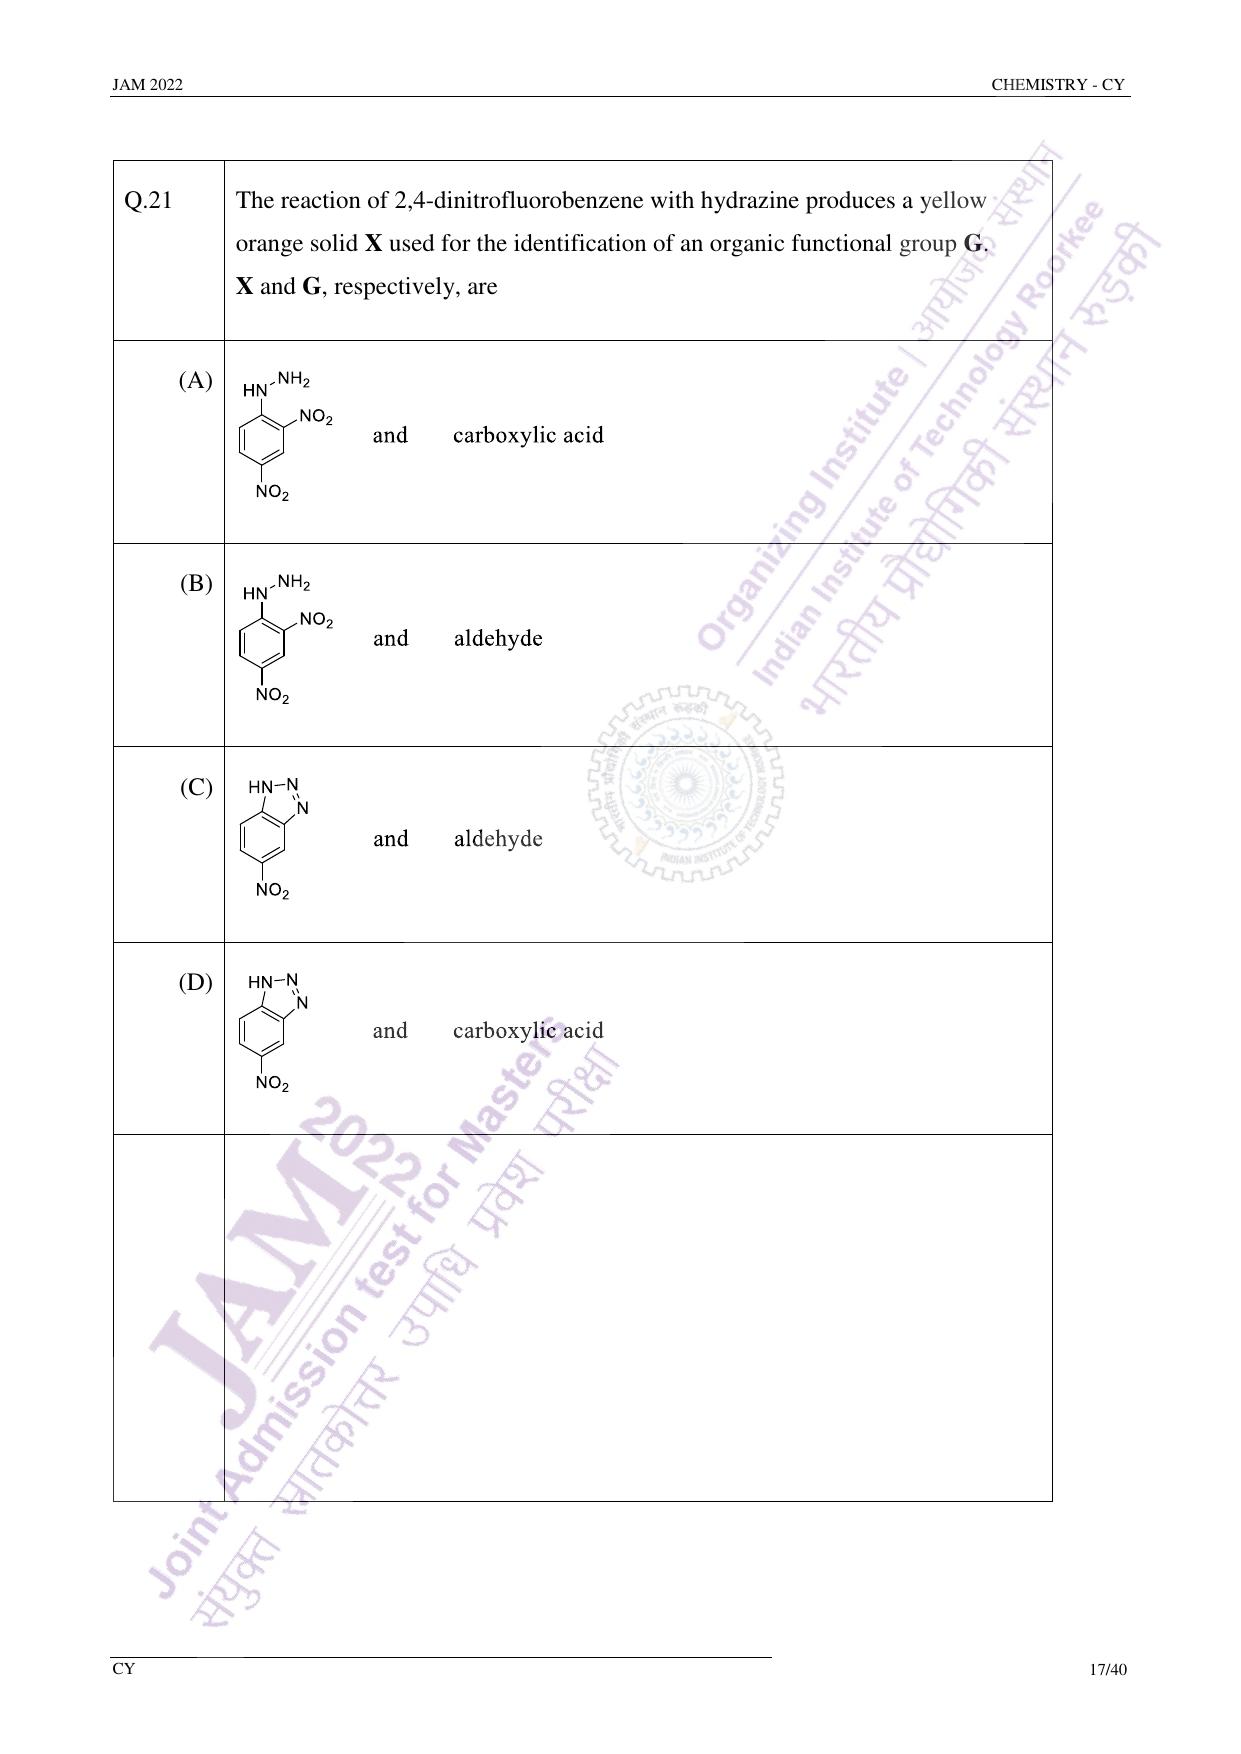 JAM 2022: CY Question Paper - Page 16